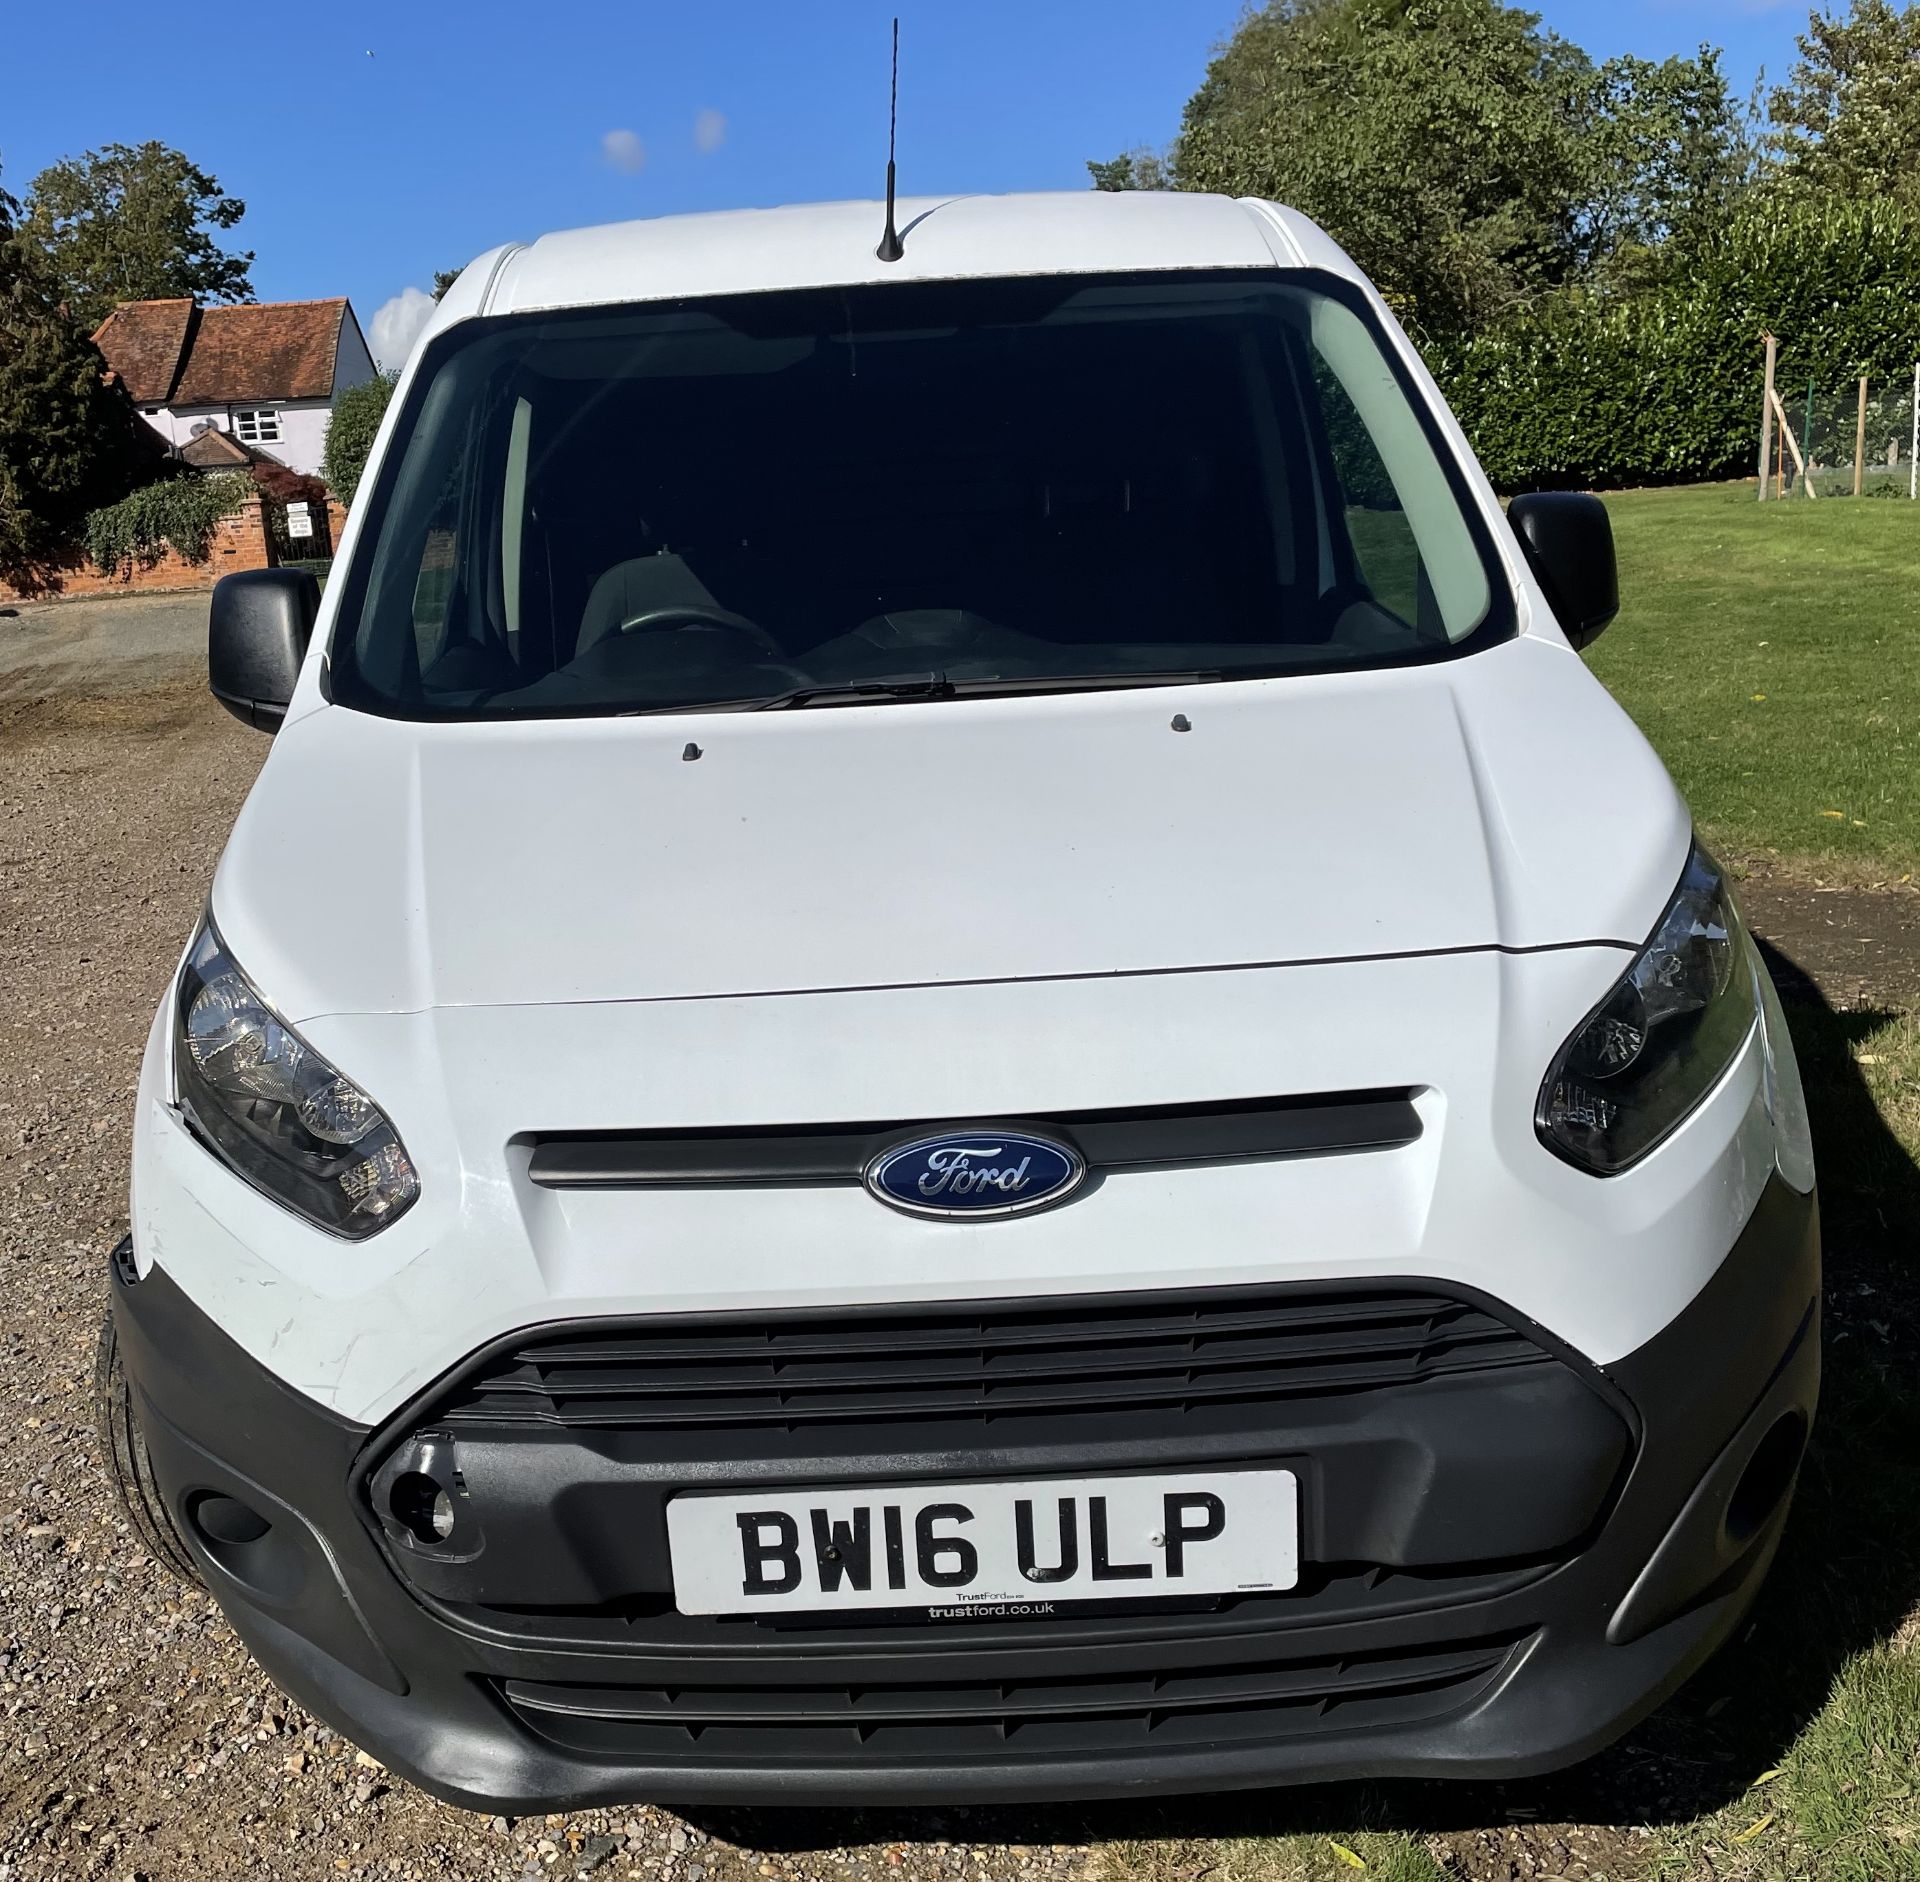 Ford PU2 Transit Connect 200, 1.6 TDCi 75ps Panel Van (Euro 5), Registration BW16 ULP, First - Image 7 of 21